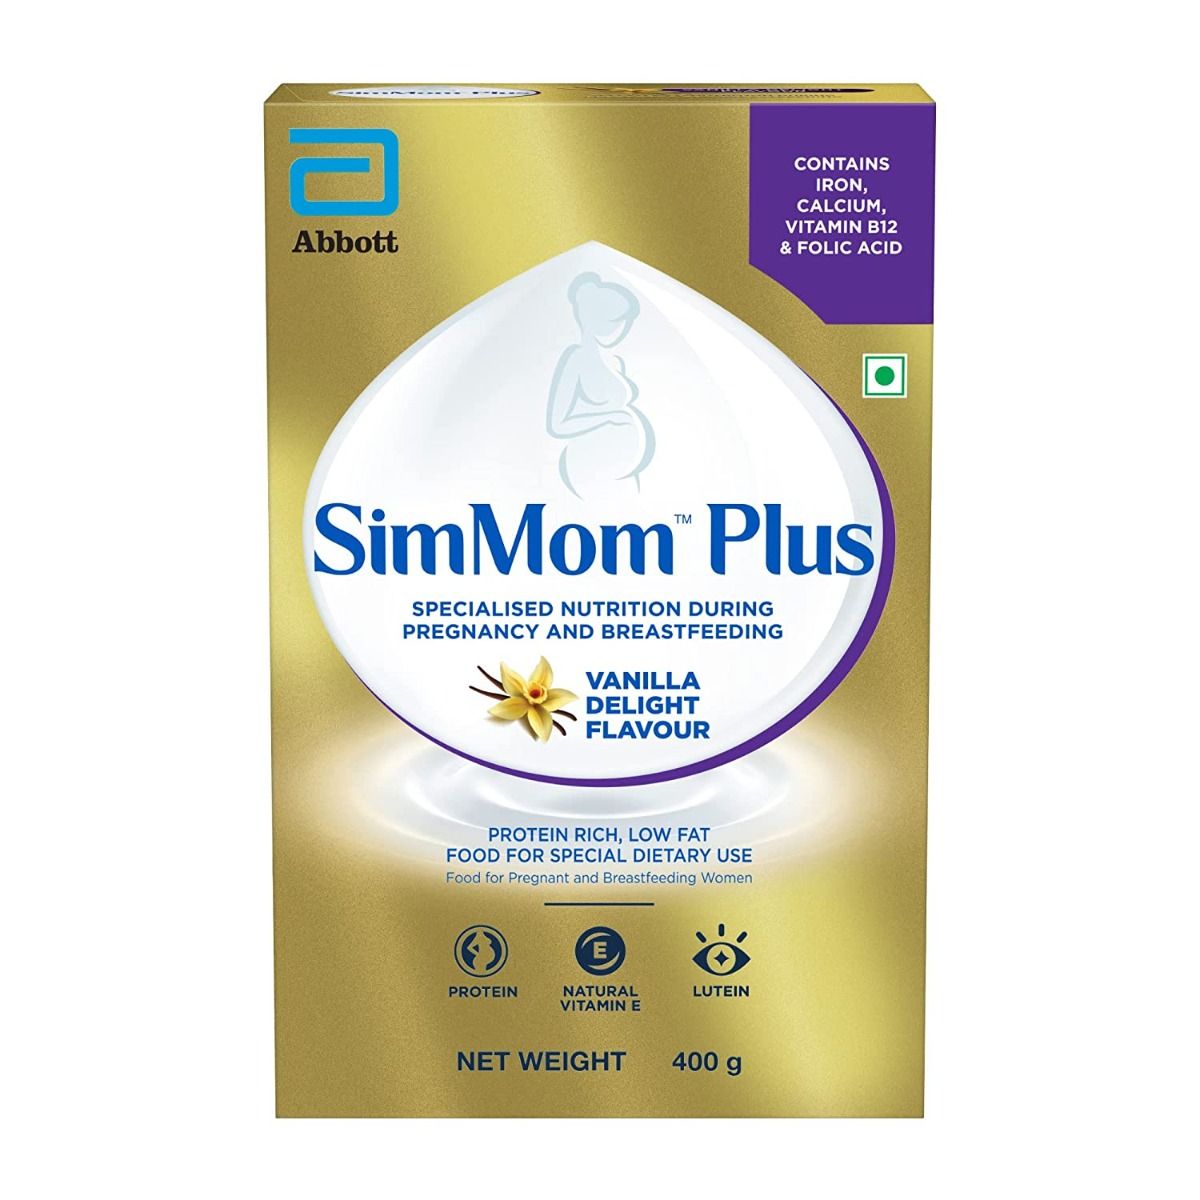 Simmom Plus Vanilla Delight Flavour Powder, 400 gm Refill Pack, Pack of 1 